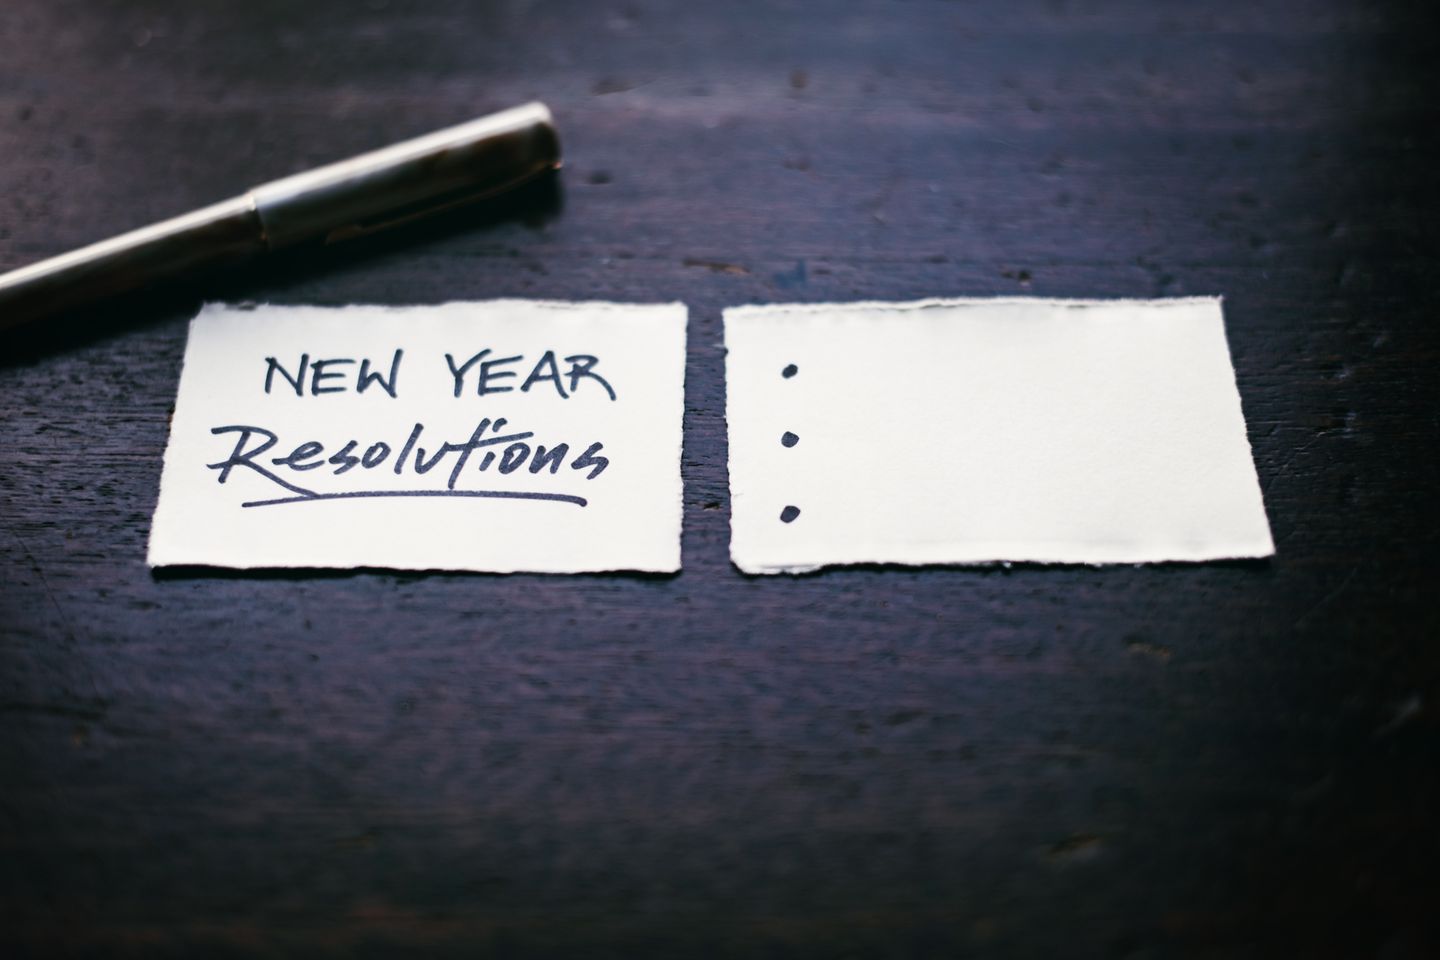 10 Cannabisthemed New Years resolutions we can get behind